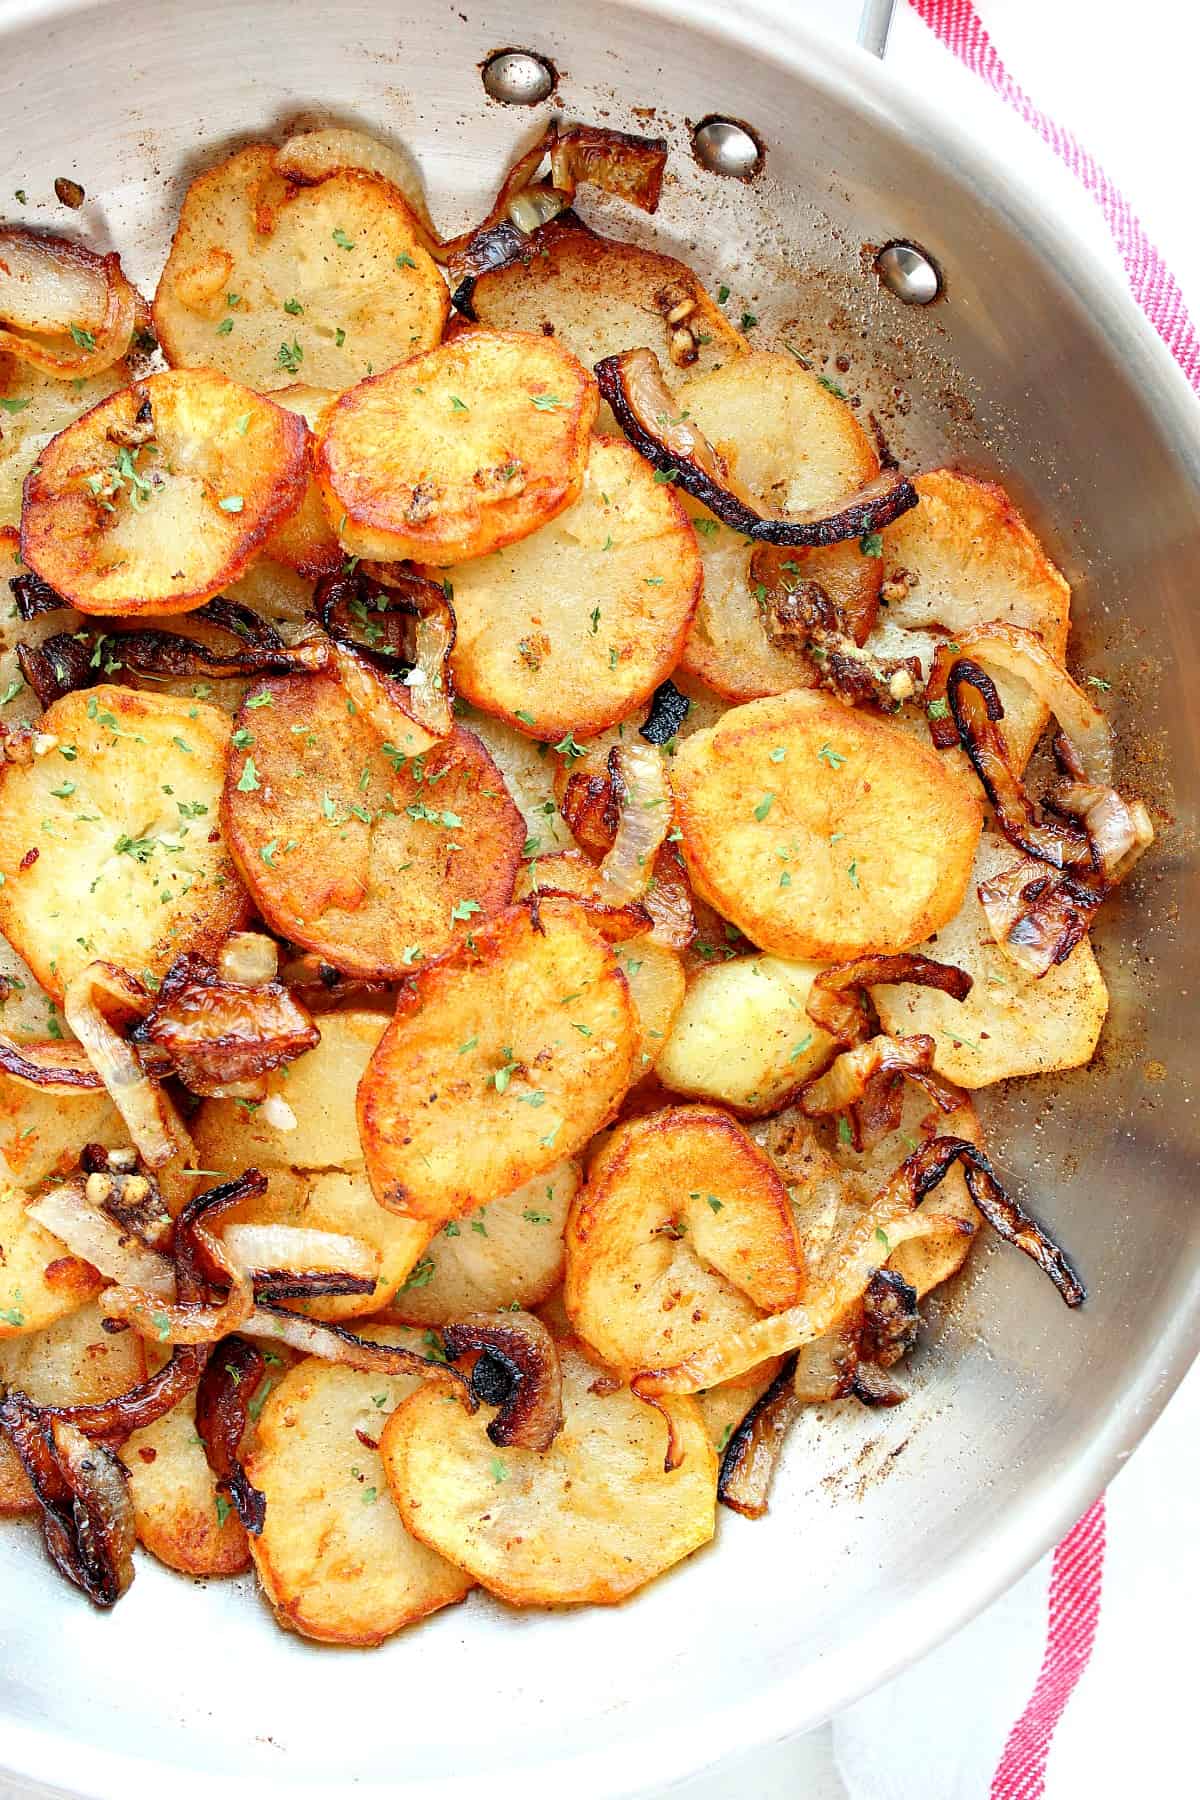 Potatoes in a skillet.